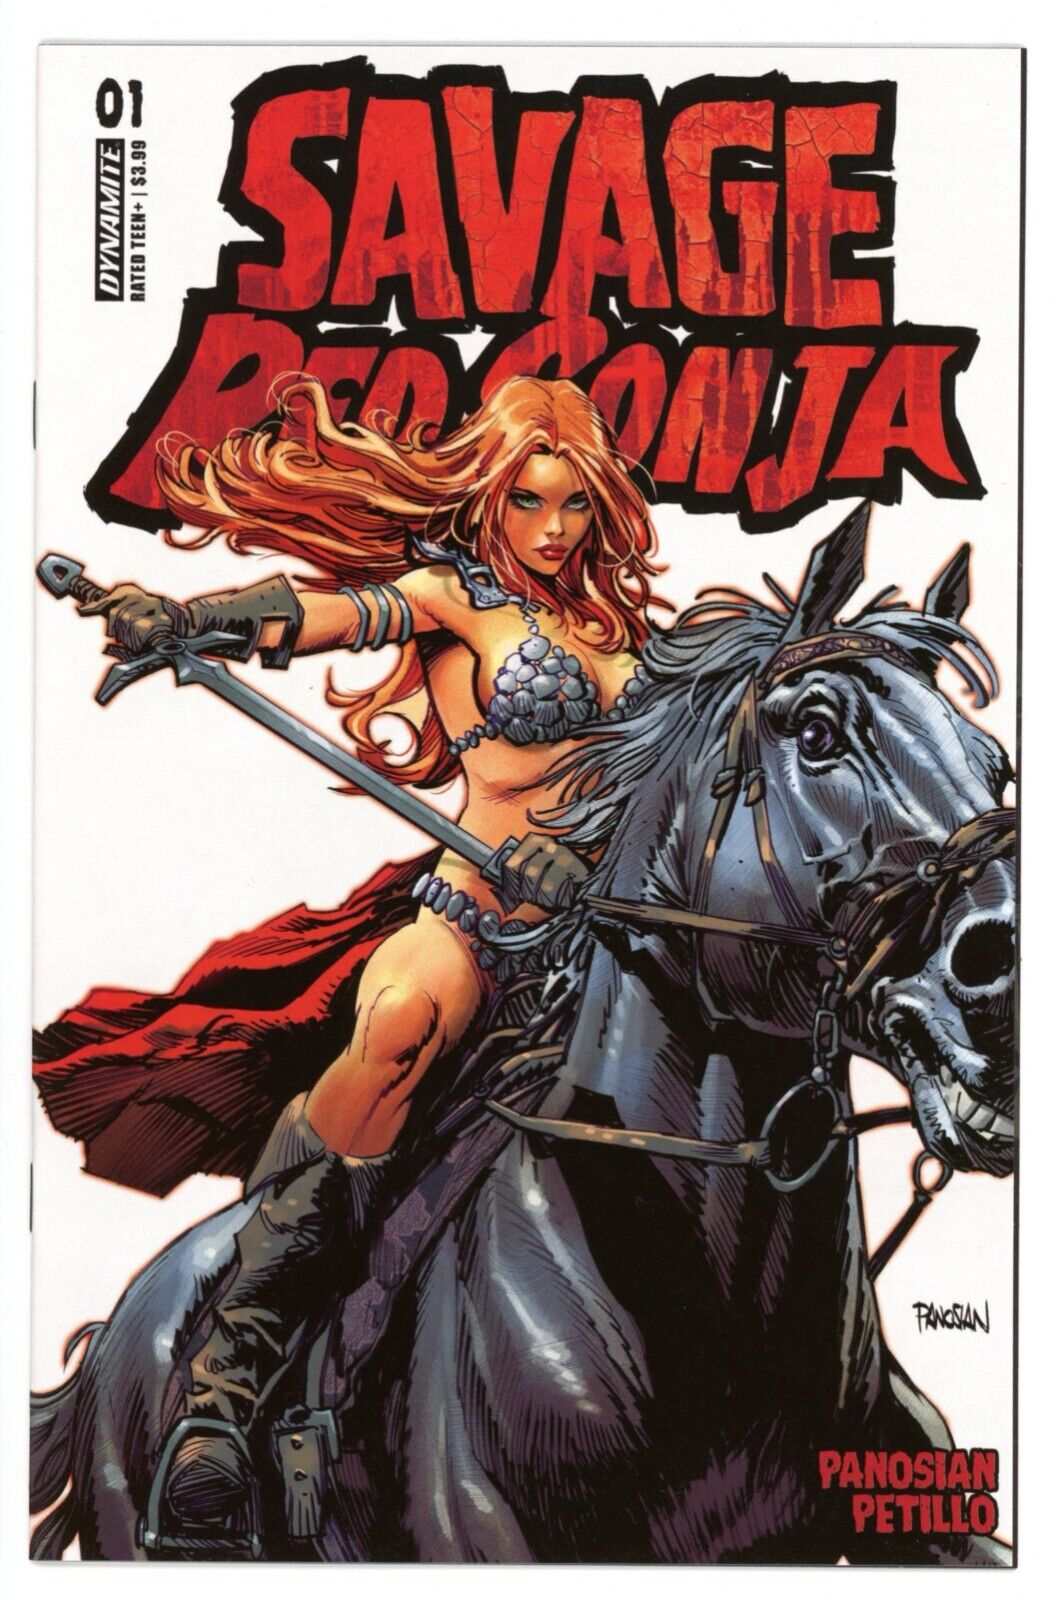 Savage Red Sonja #1    |   Cover A   |   NM  NEW   ⚔️ NO STOCK PHOTOS⚔️